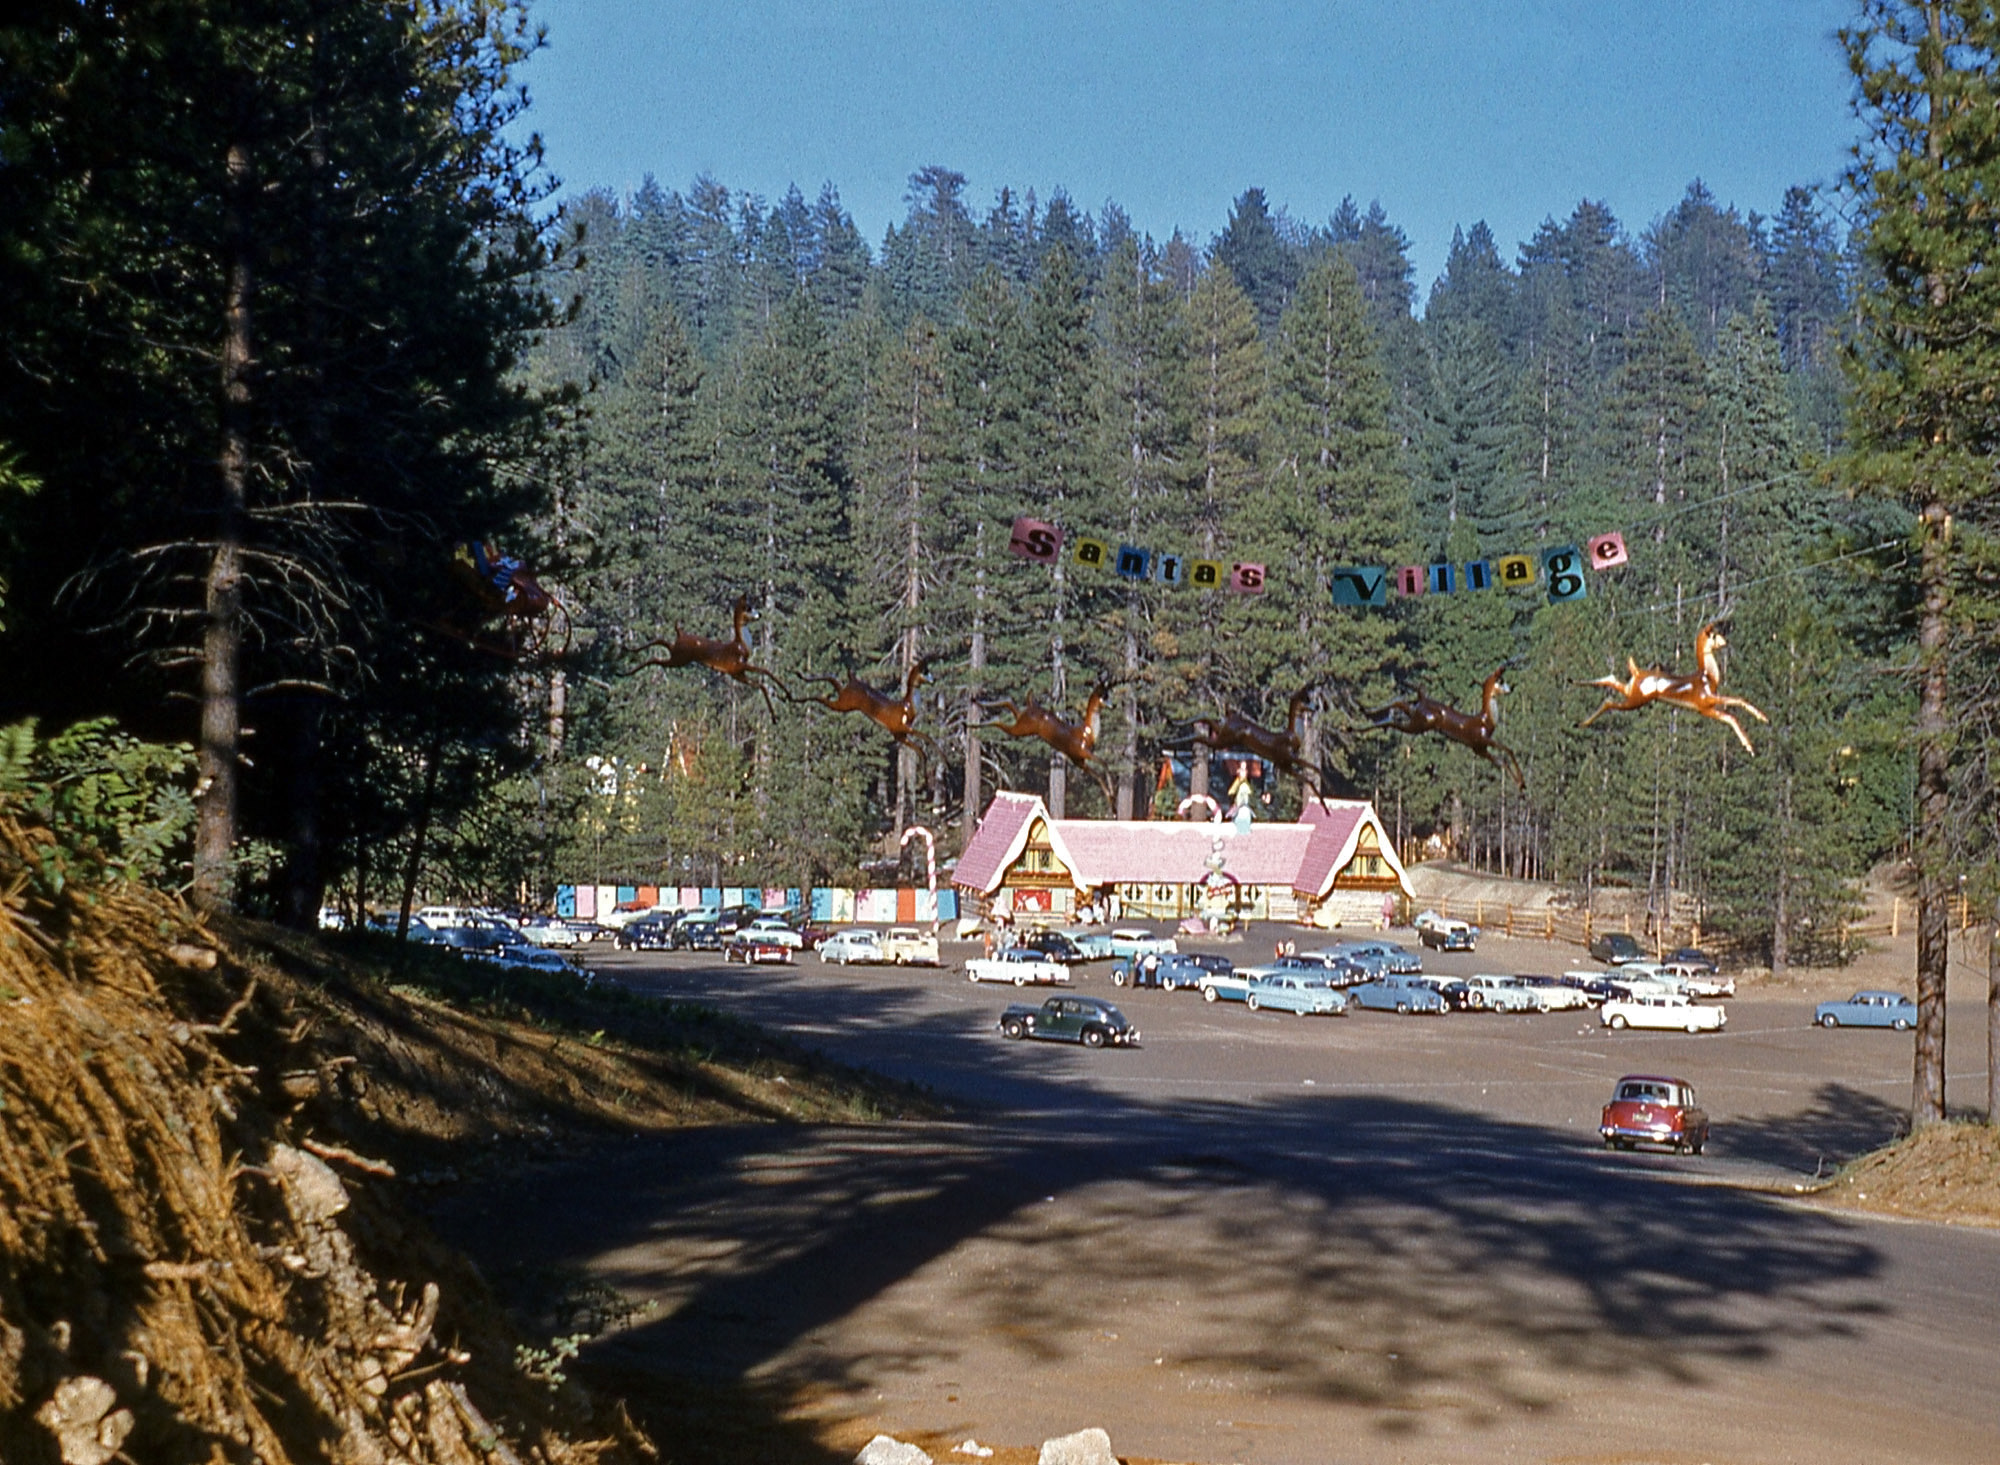 Santa's Village at Lake Arrowhead in Southern California in a Kodachrome slide I found in a thrift store. The park opened in 1955, and I don't see any 1957 model cars, so the date is my best guess. View full size.